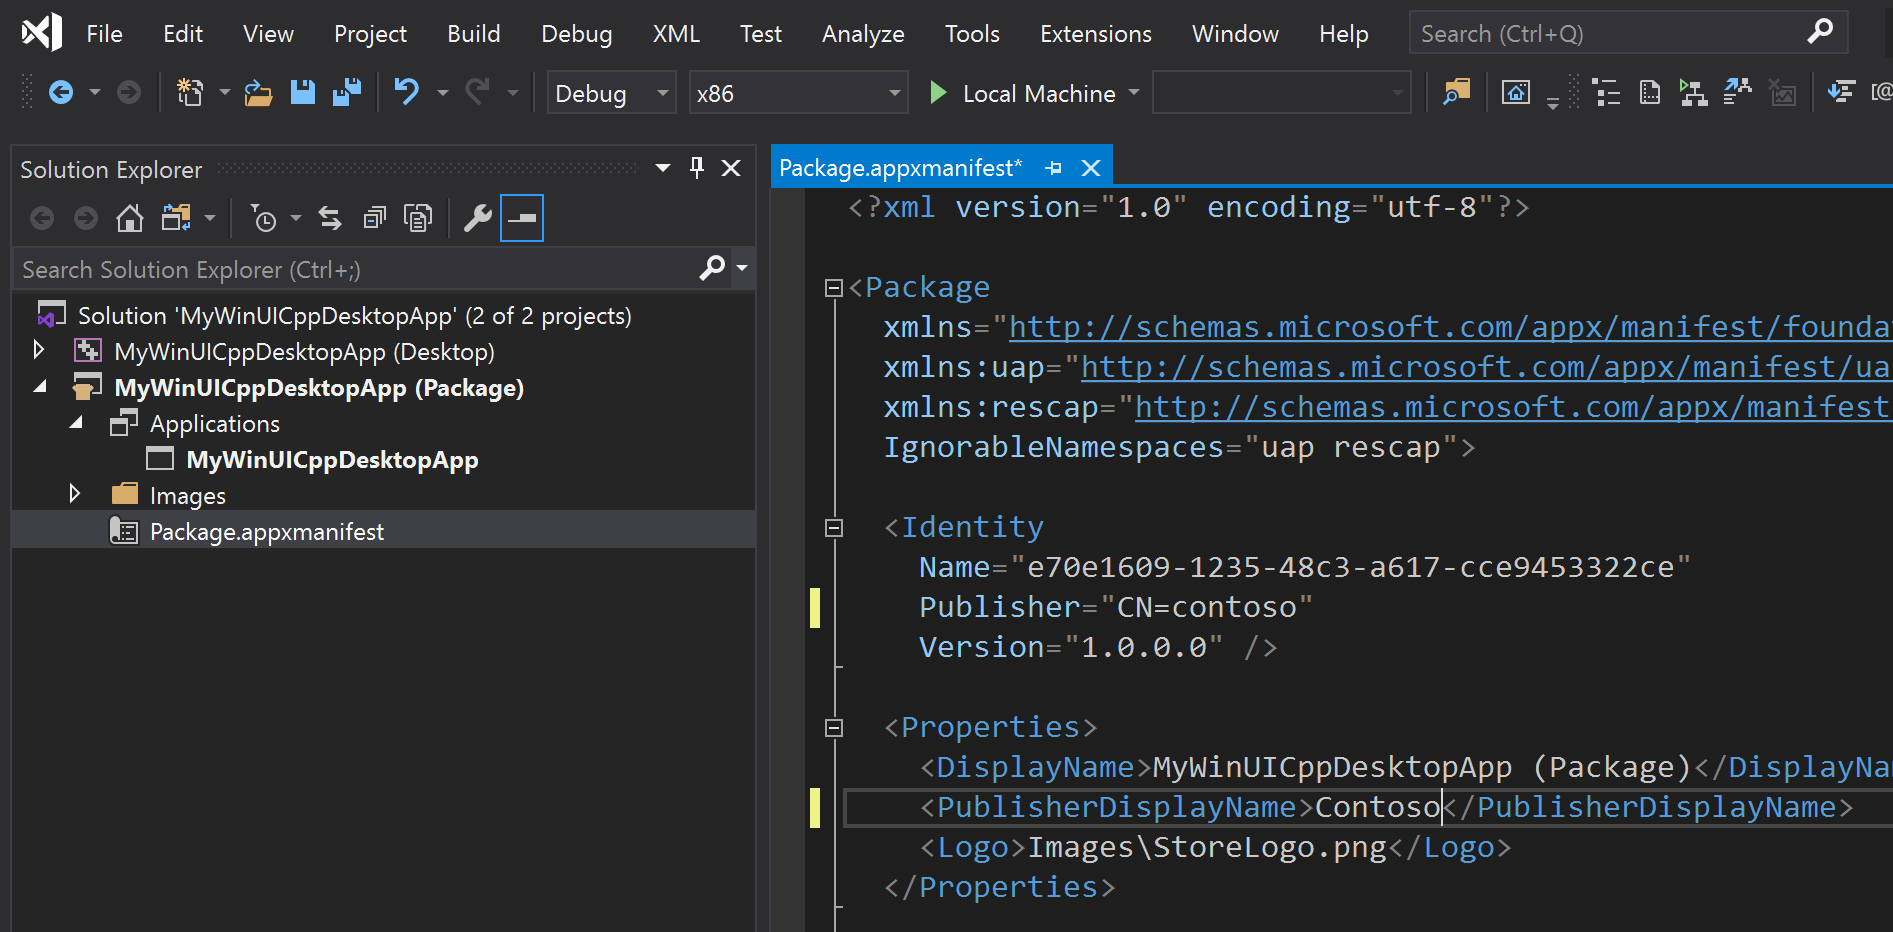 Another screenshot of Visual Studio showing the Solution Explorer pane and the contents of the Package app x manifest file.